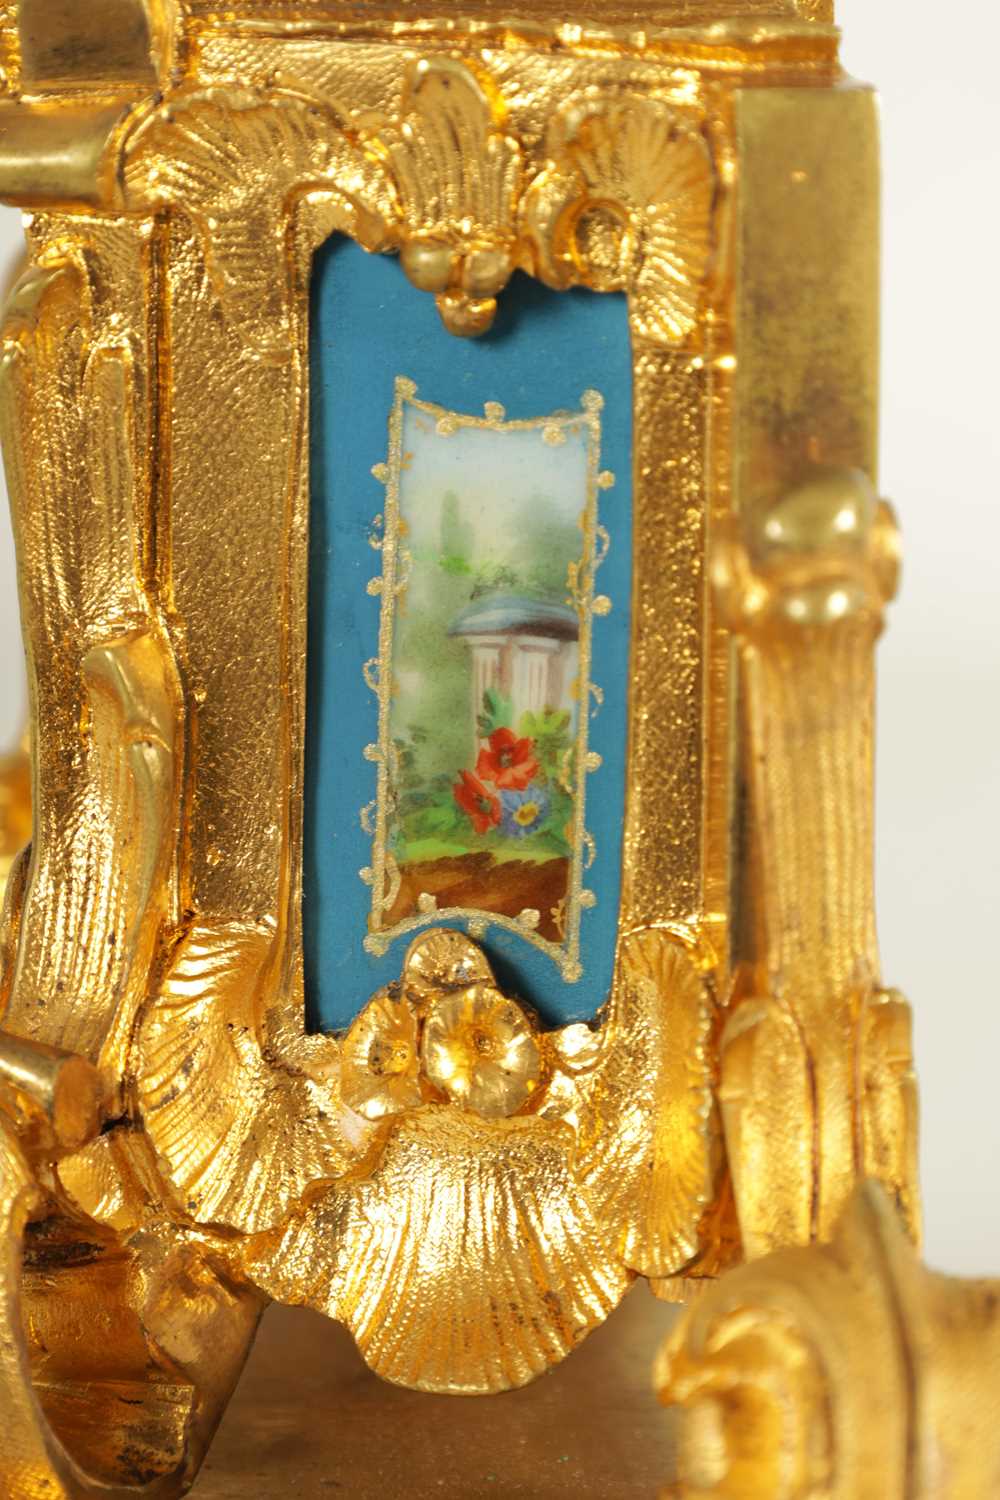 A SMALL LATE 19TH CENTURY FRENCH PORCELAIN PANELLED ORMOLU CARRIAGE STYLE MANTEL CLOCK - Image 10 of 13